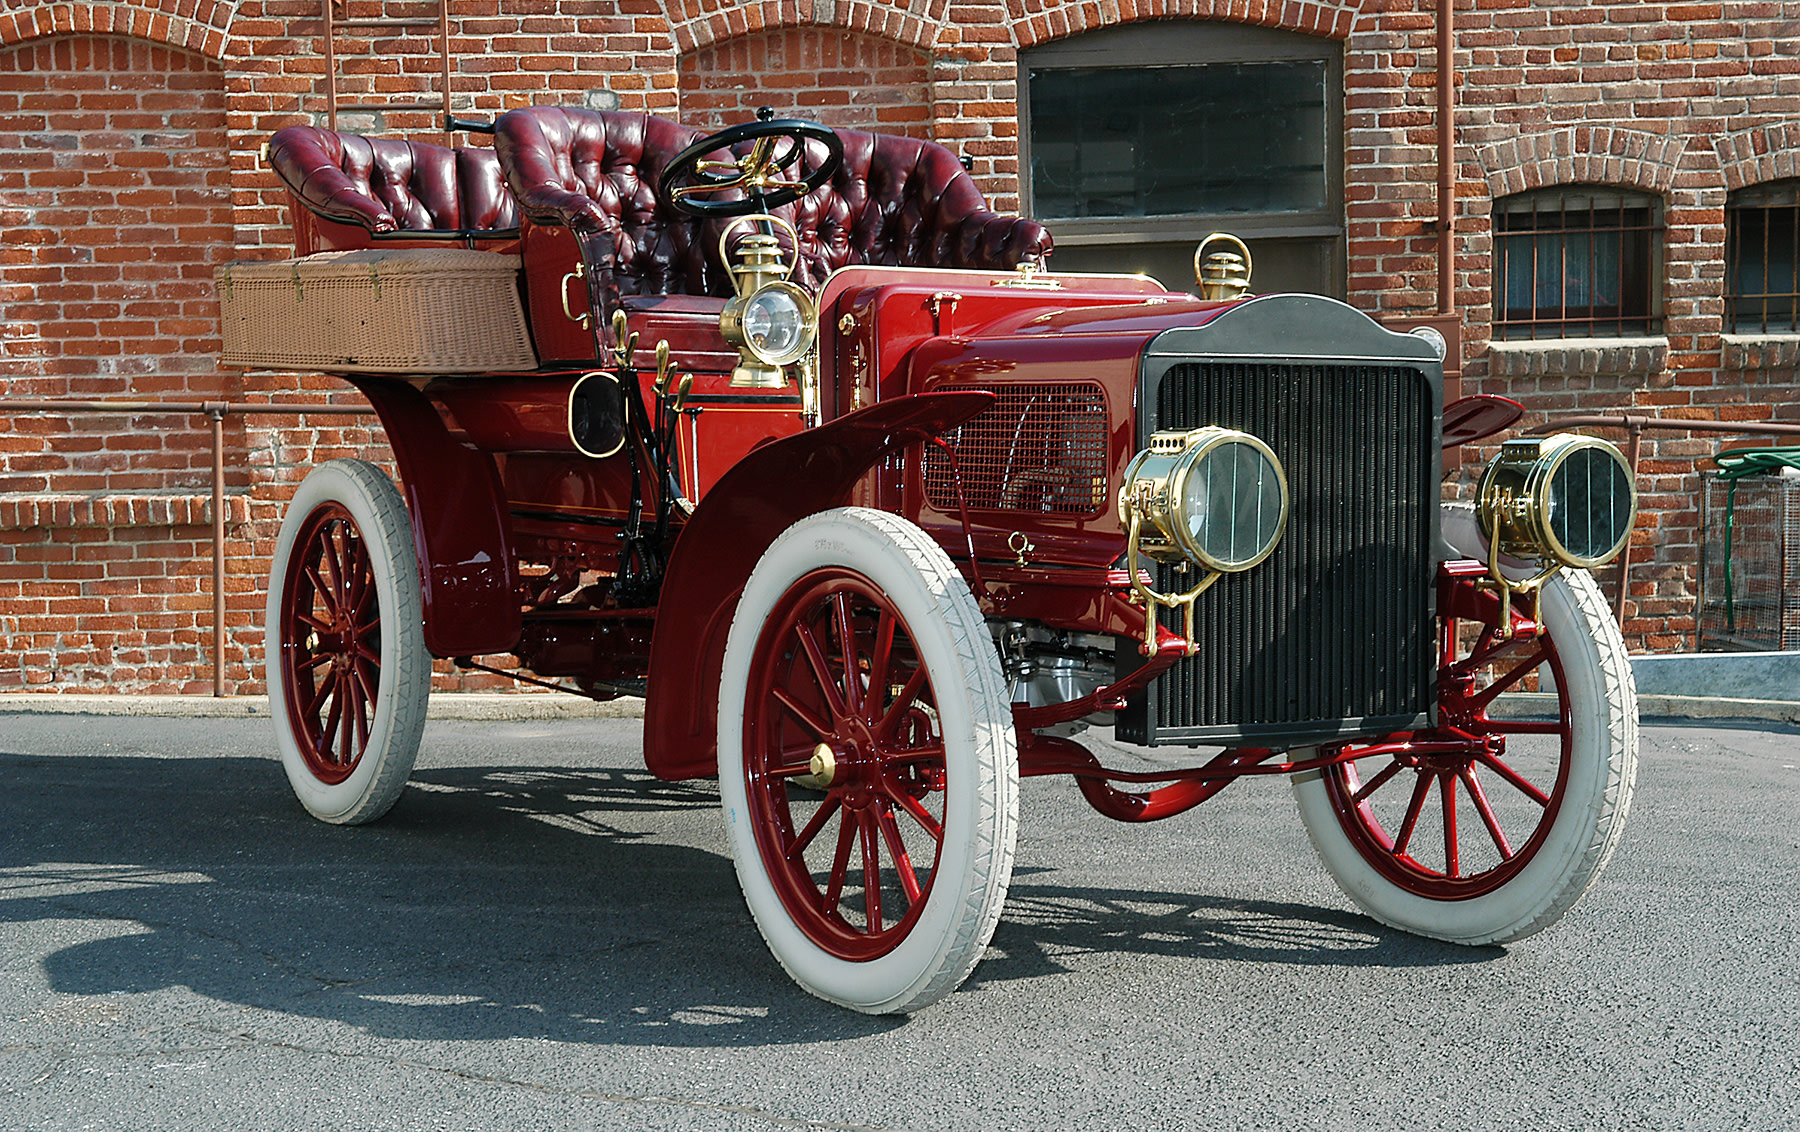 1904 White Type D Canopy-Top Touring Car